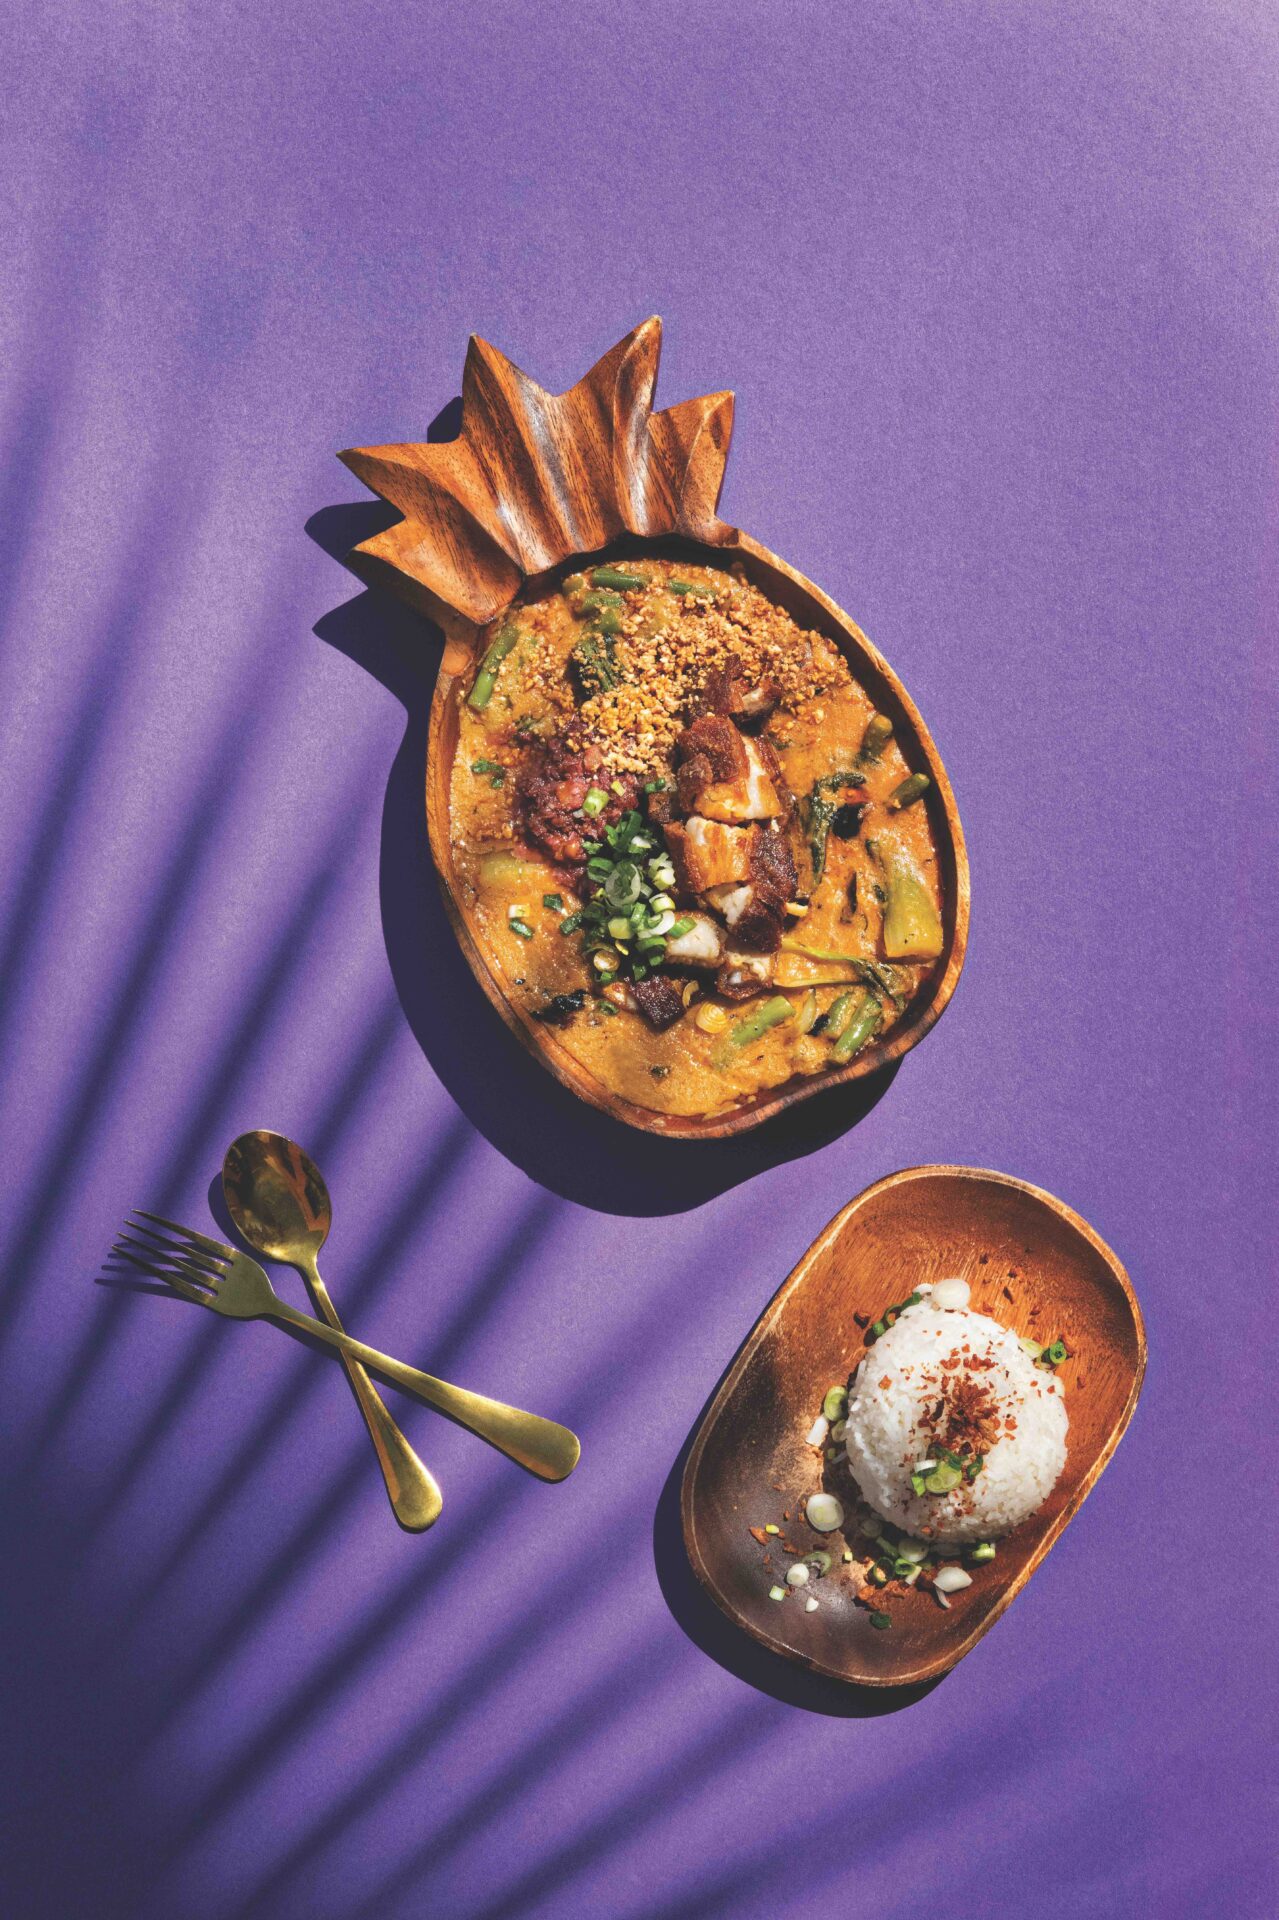 Kare Kare from Purple Roots that serves Filipino food. The Kare Kare is served in a pineapple-shaped wooden bowl with rice